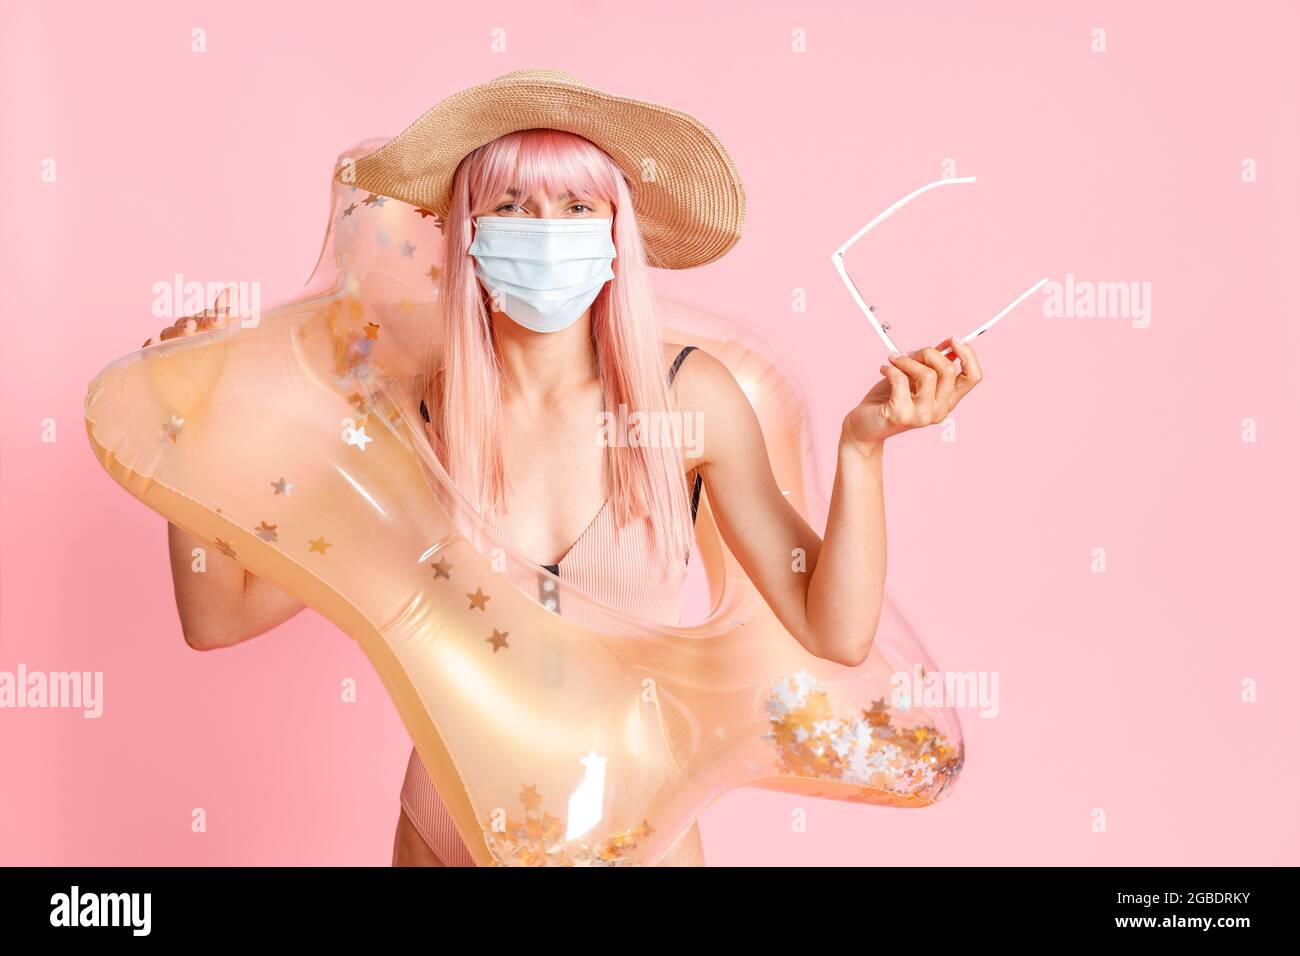 Woman in straw hat and swimsuit with inflatable rubber ring wearing hygienic face mask to prevent contagious coronavirus on resort beach, posing Stock Photo